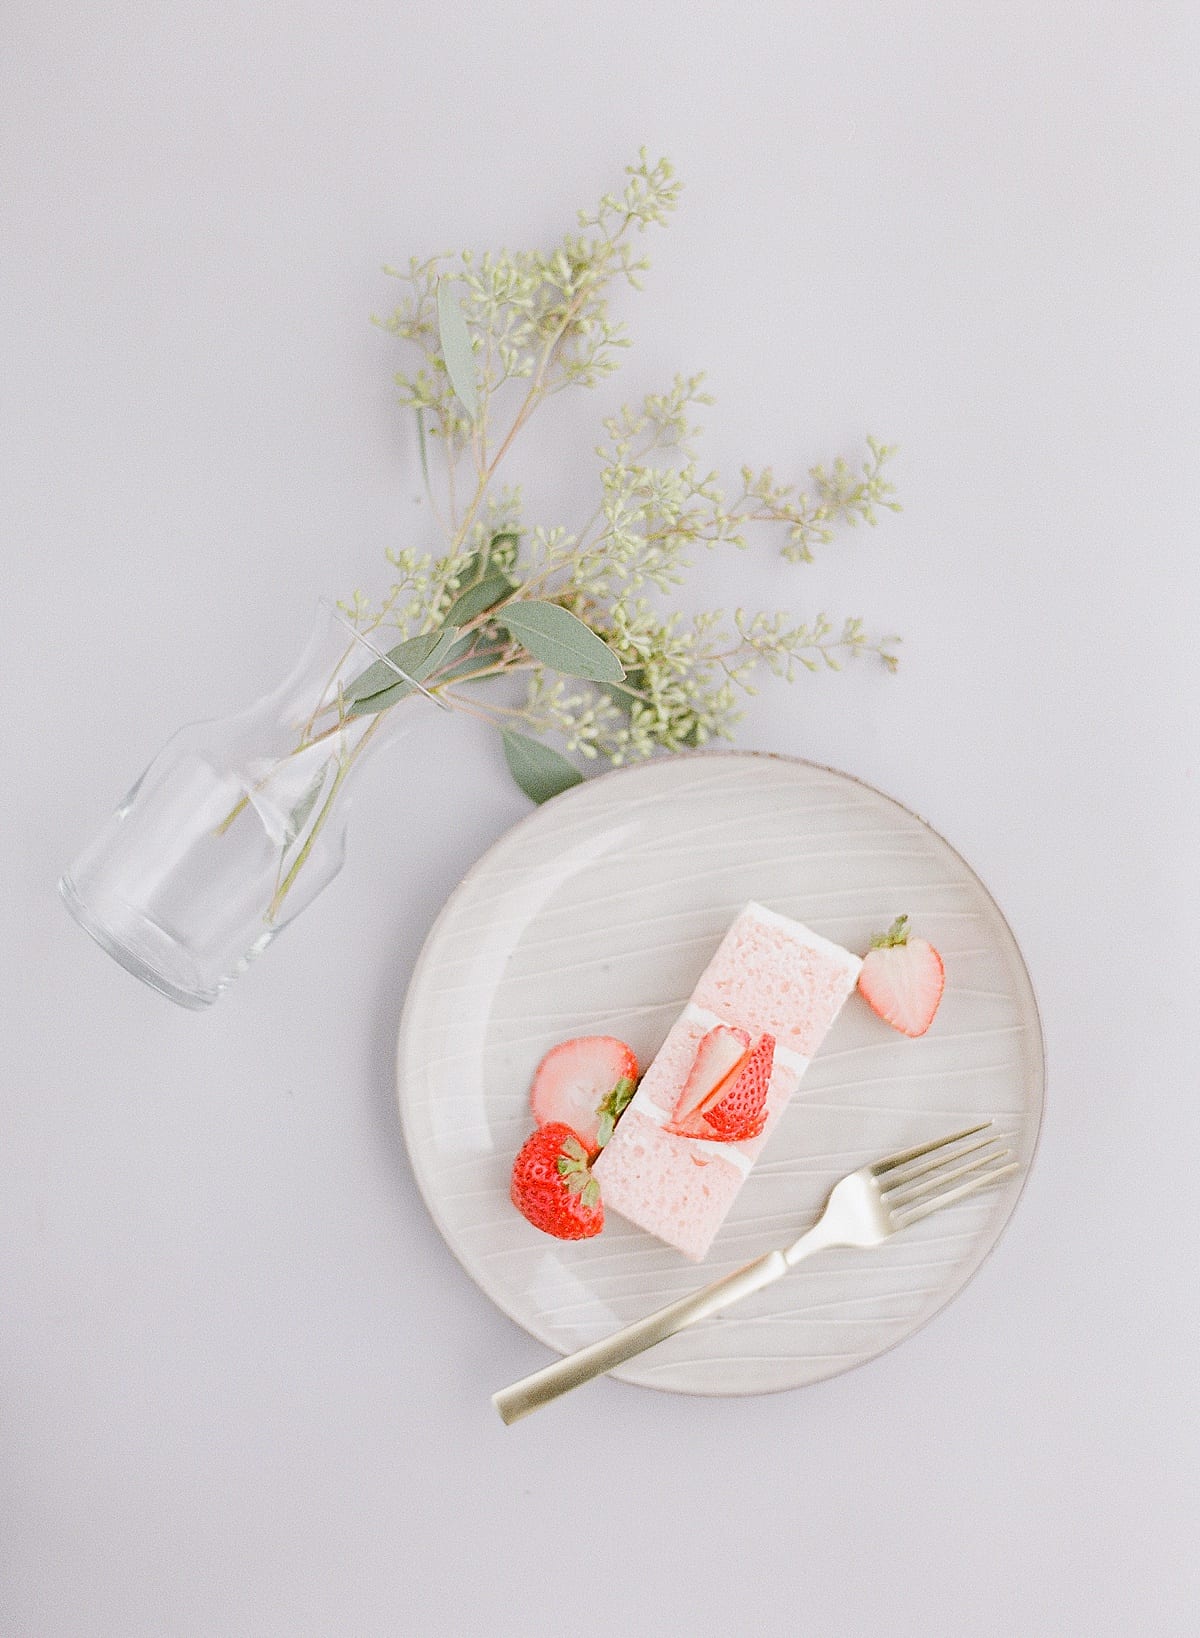 Strawberry Cake on Plate with Vase of Seeded Eucalyptus Photo